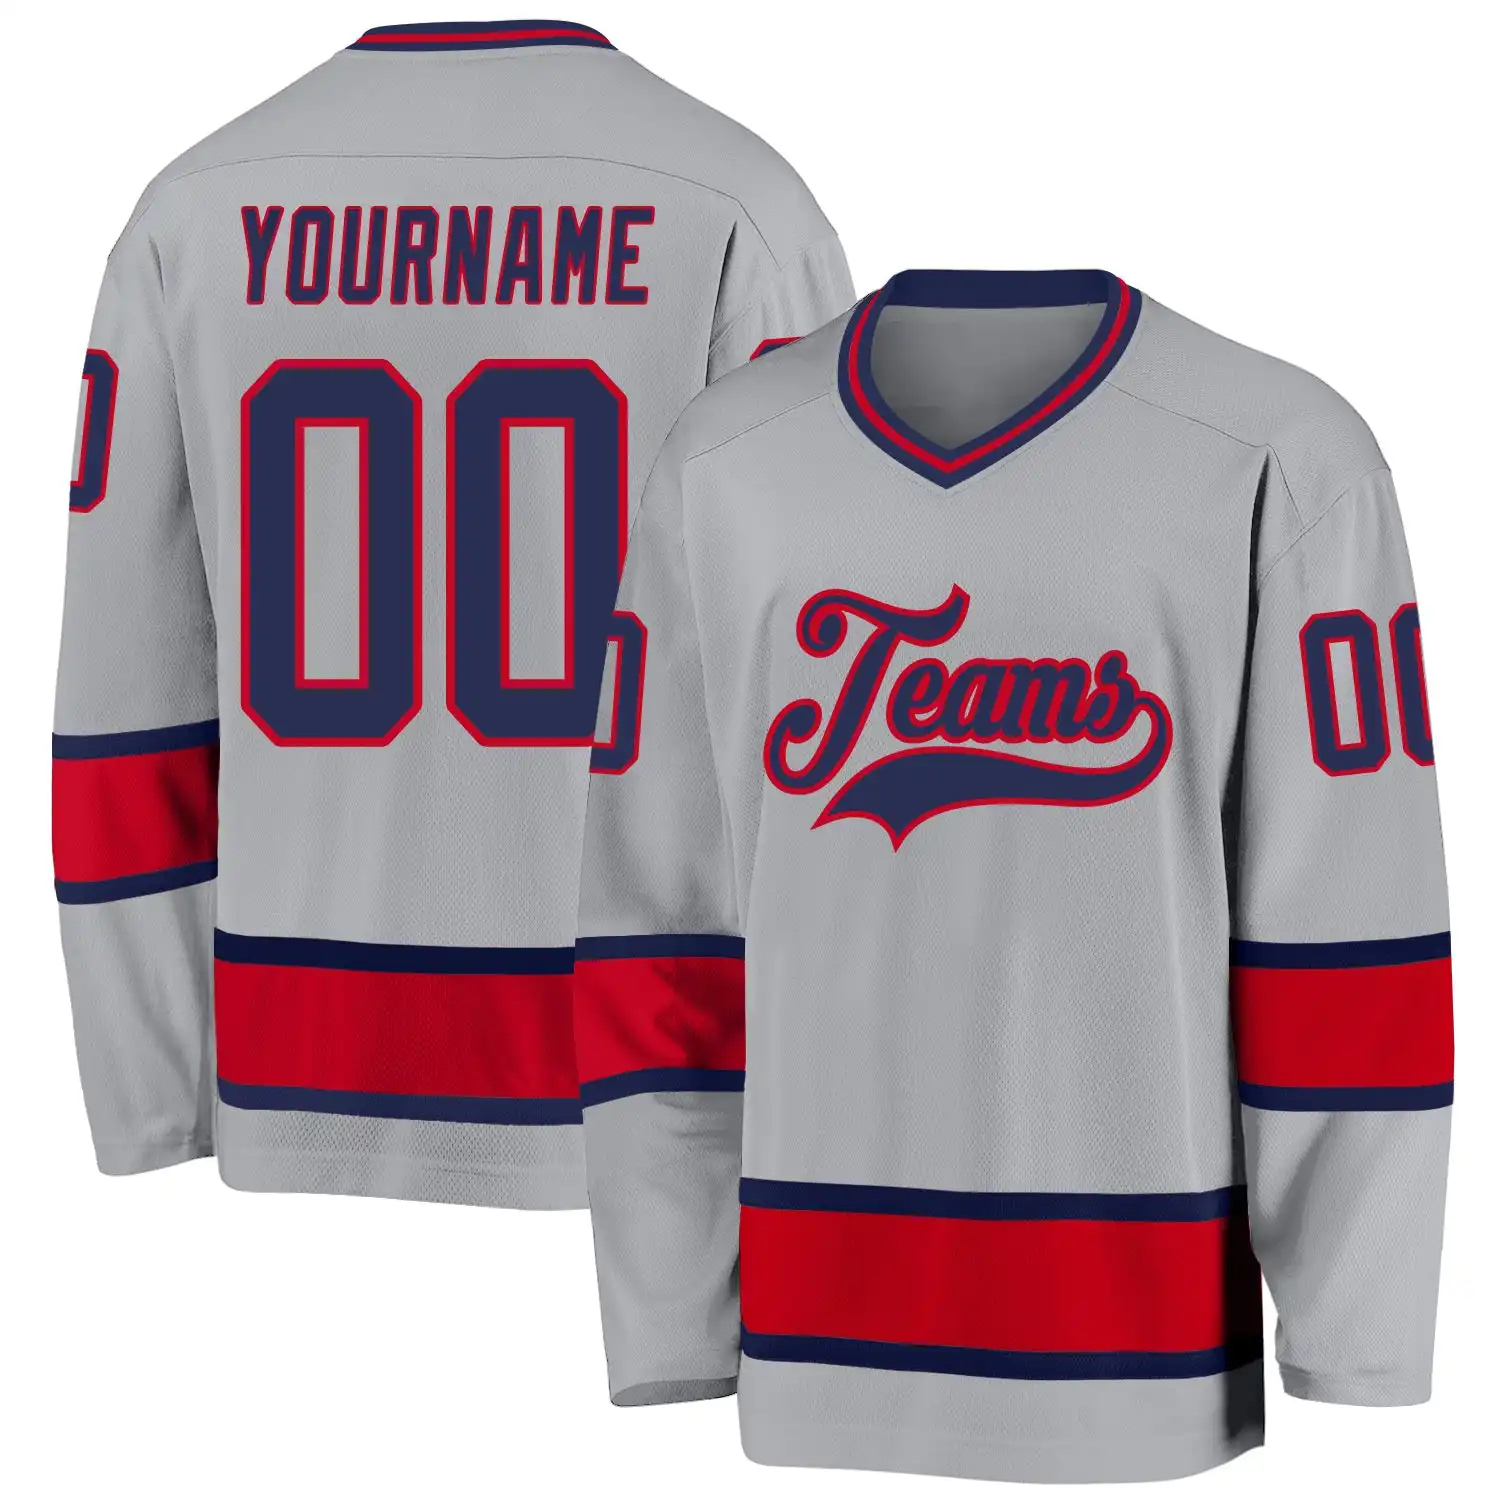 Stitched And Print Gray Navy-red Hockey Jersey Custom